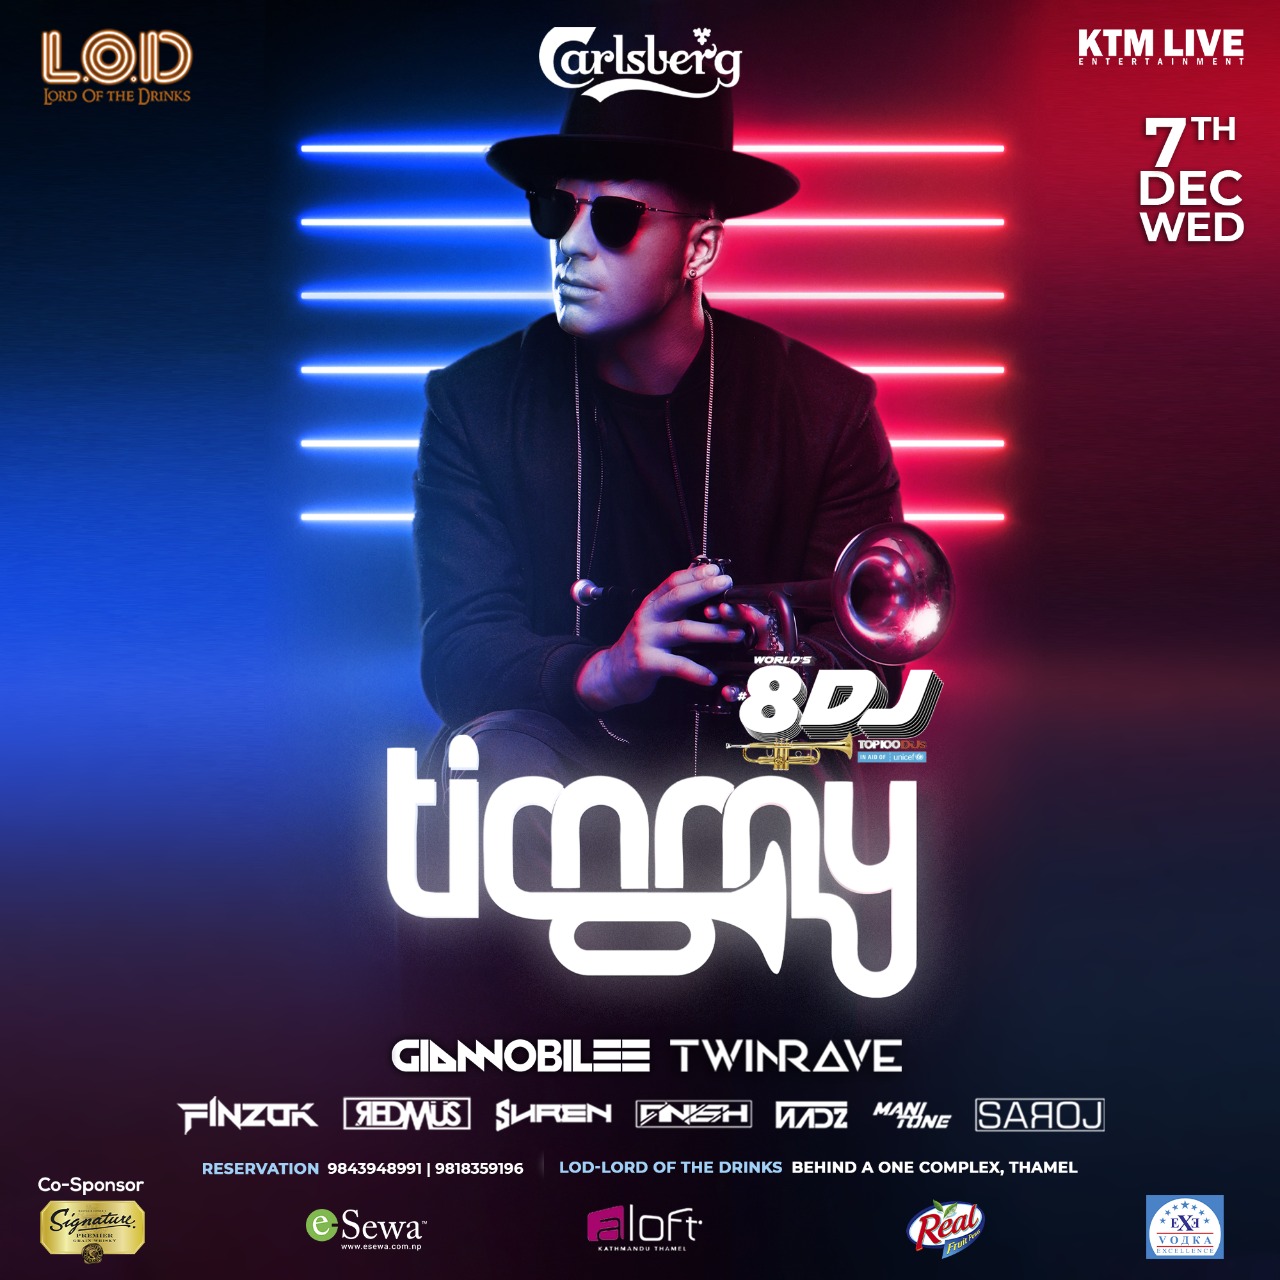 Wednesday Night With Timmy Trumpet Dec 7th 2022